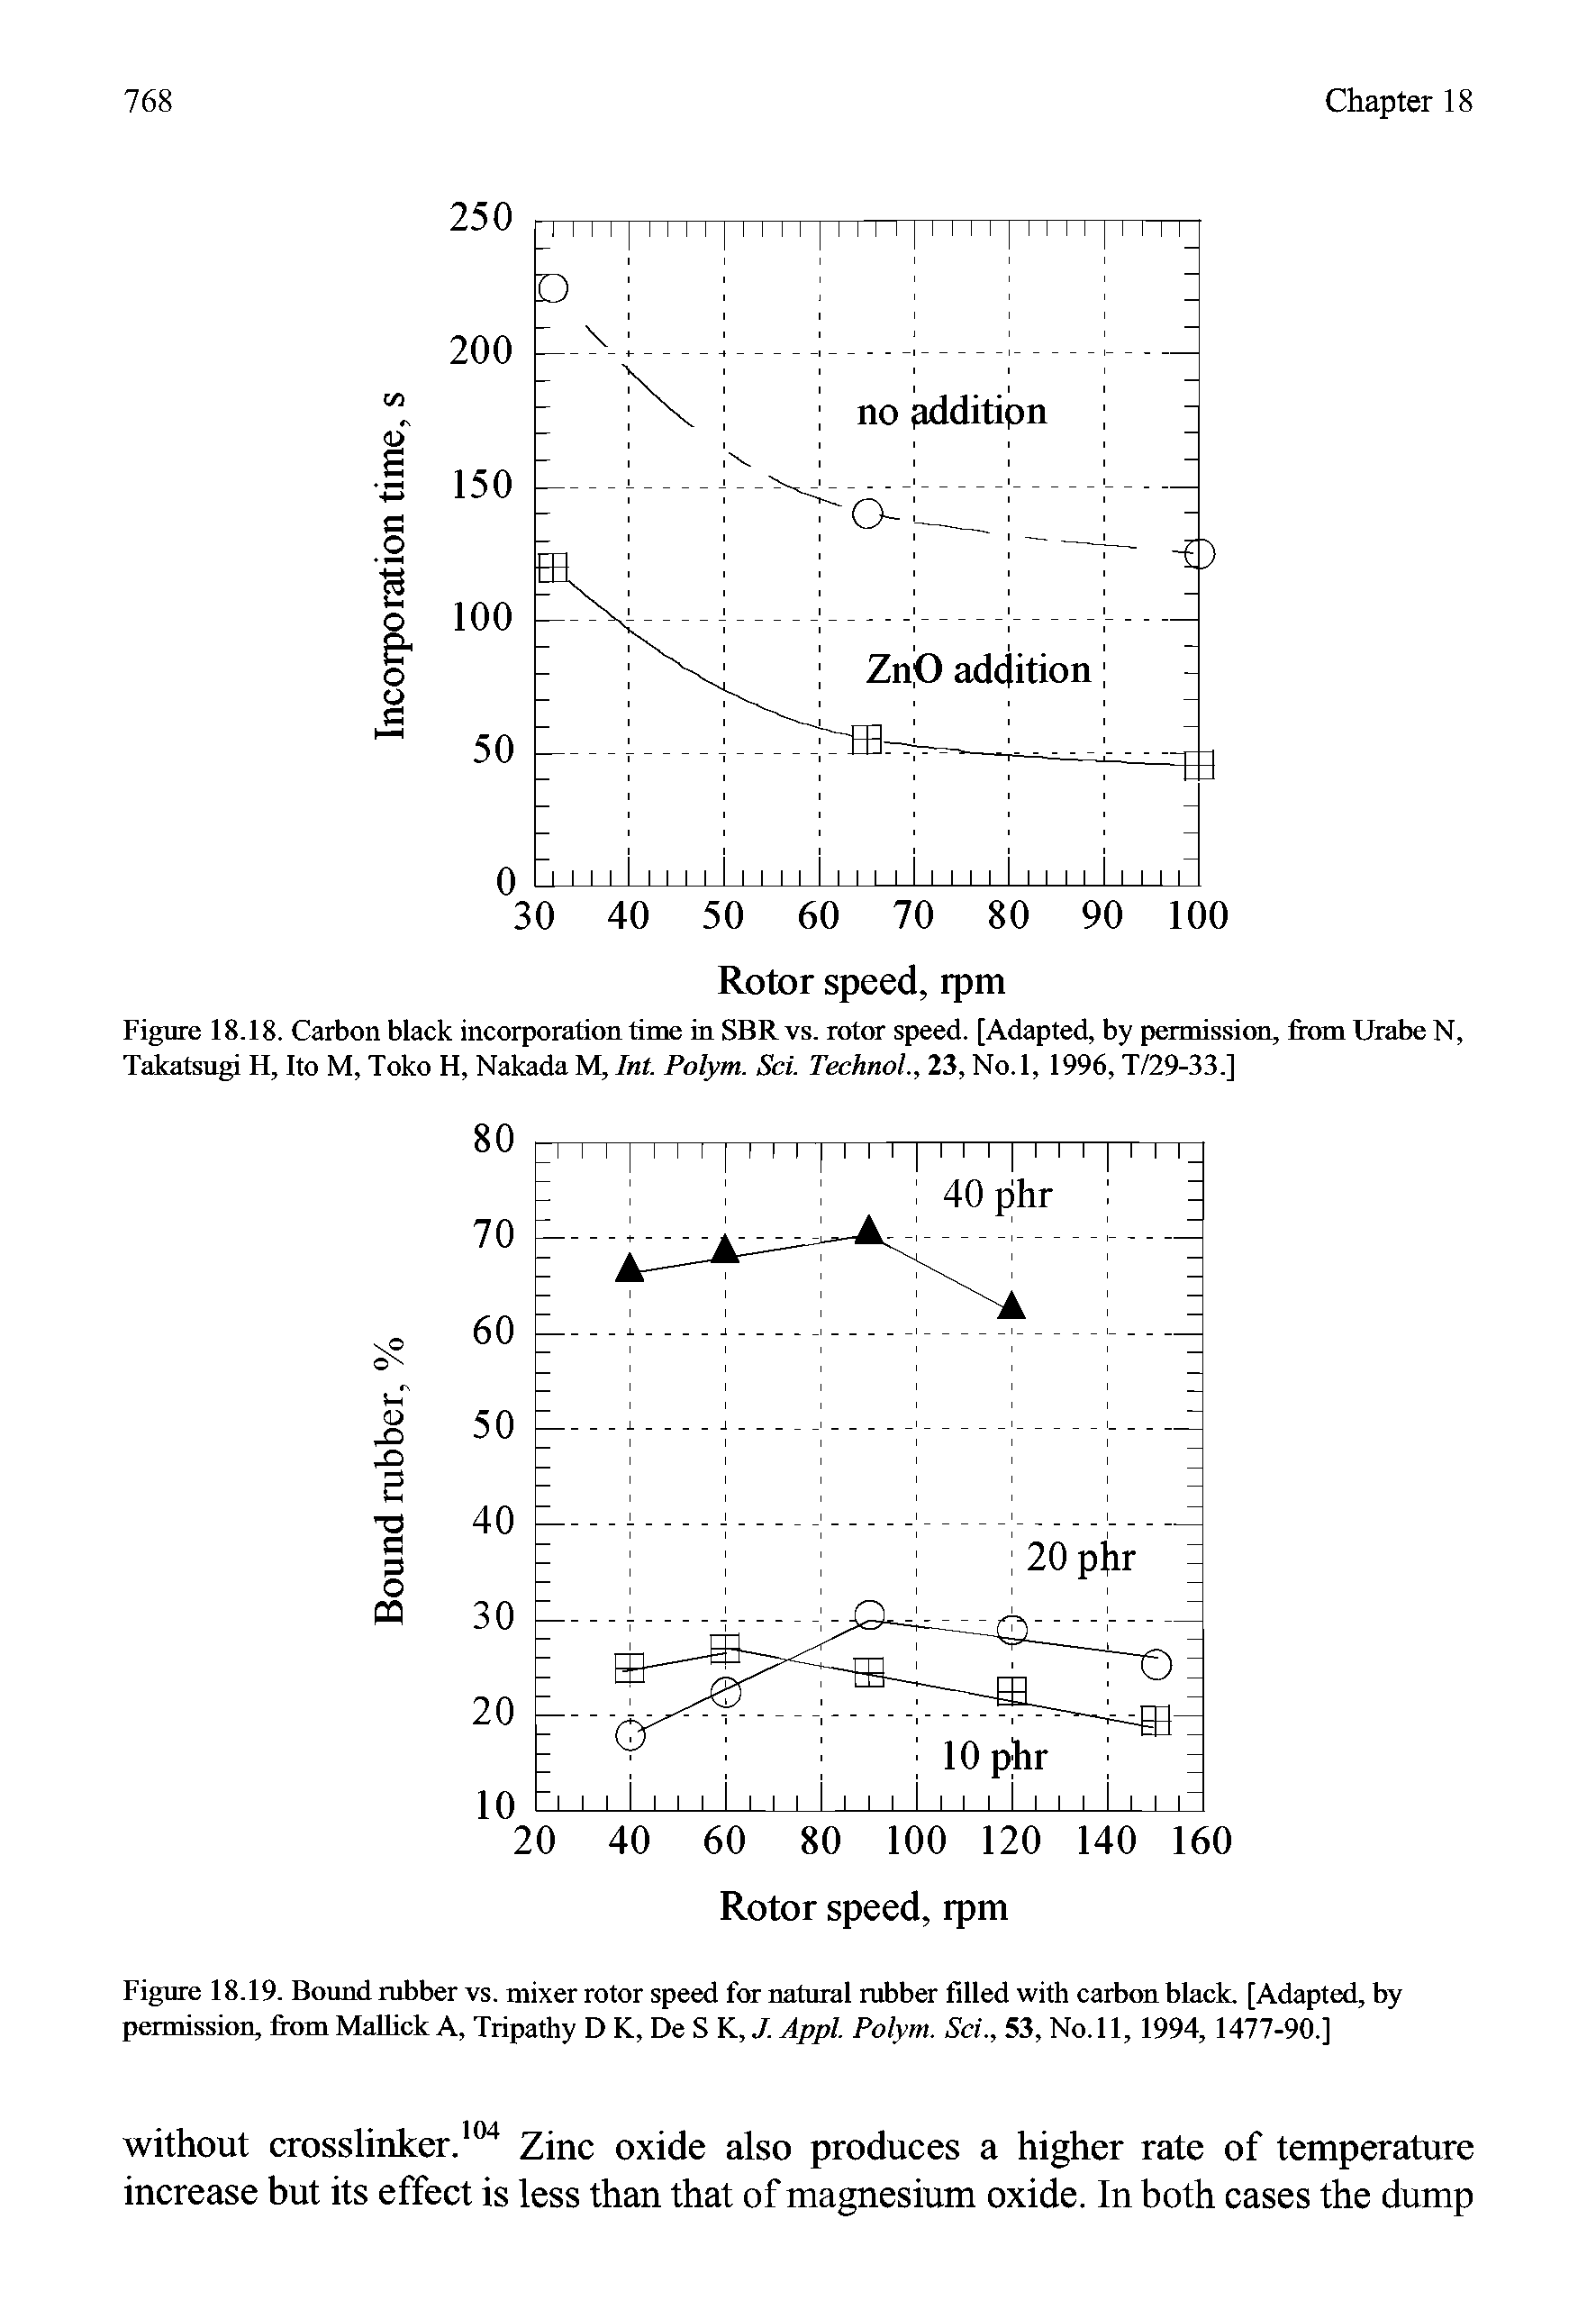 Figure 18.19. Bound rubber vs. mixer rotor speed for natural rubber filled with carbon black. [Adapted, by permission, from Mai lick A, Tripathy D K, De S K, J. Appl. Polym. Sci., 53, No. 11, 1994, 1477-90.]...